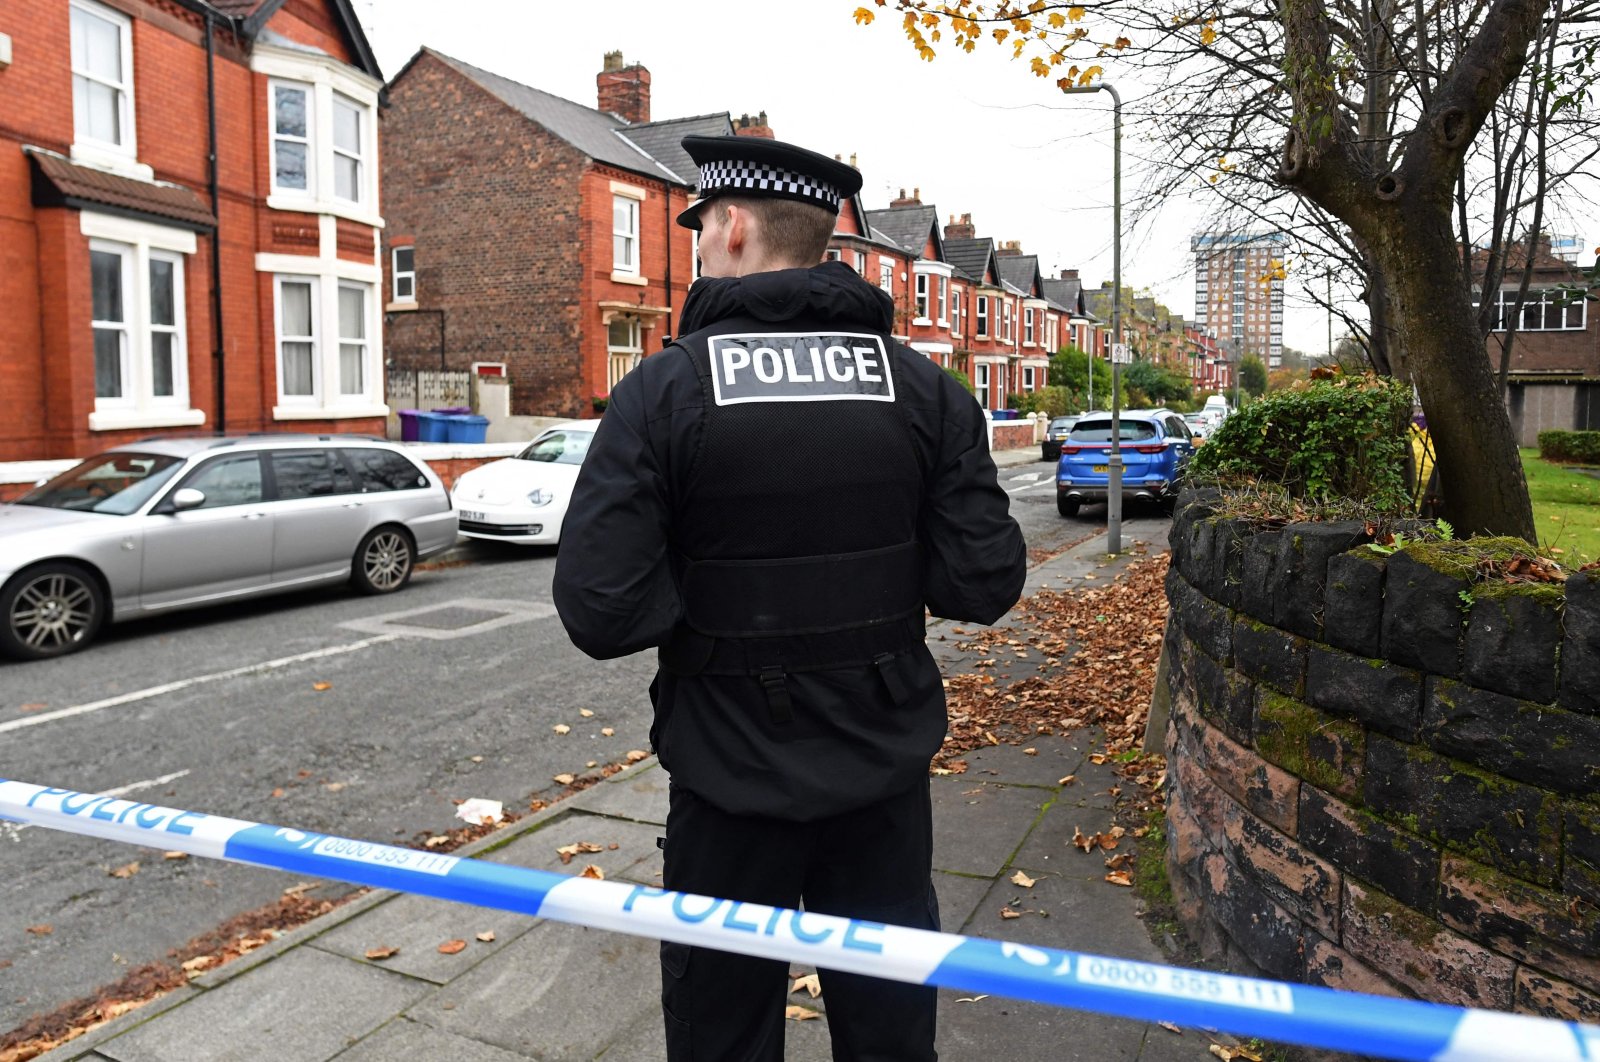 A police officer works inside a cordoned-off area on Rutland Avenue, the place where police have confirmed the passenger of the taxi that later exploded outside the Women&#039;s Hospital in Liverpool was picked up, Liverpool, U.K., Nov. 15, 2021. (AFP Photo)